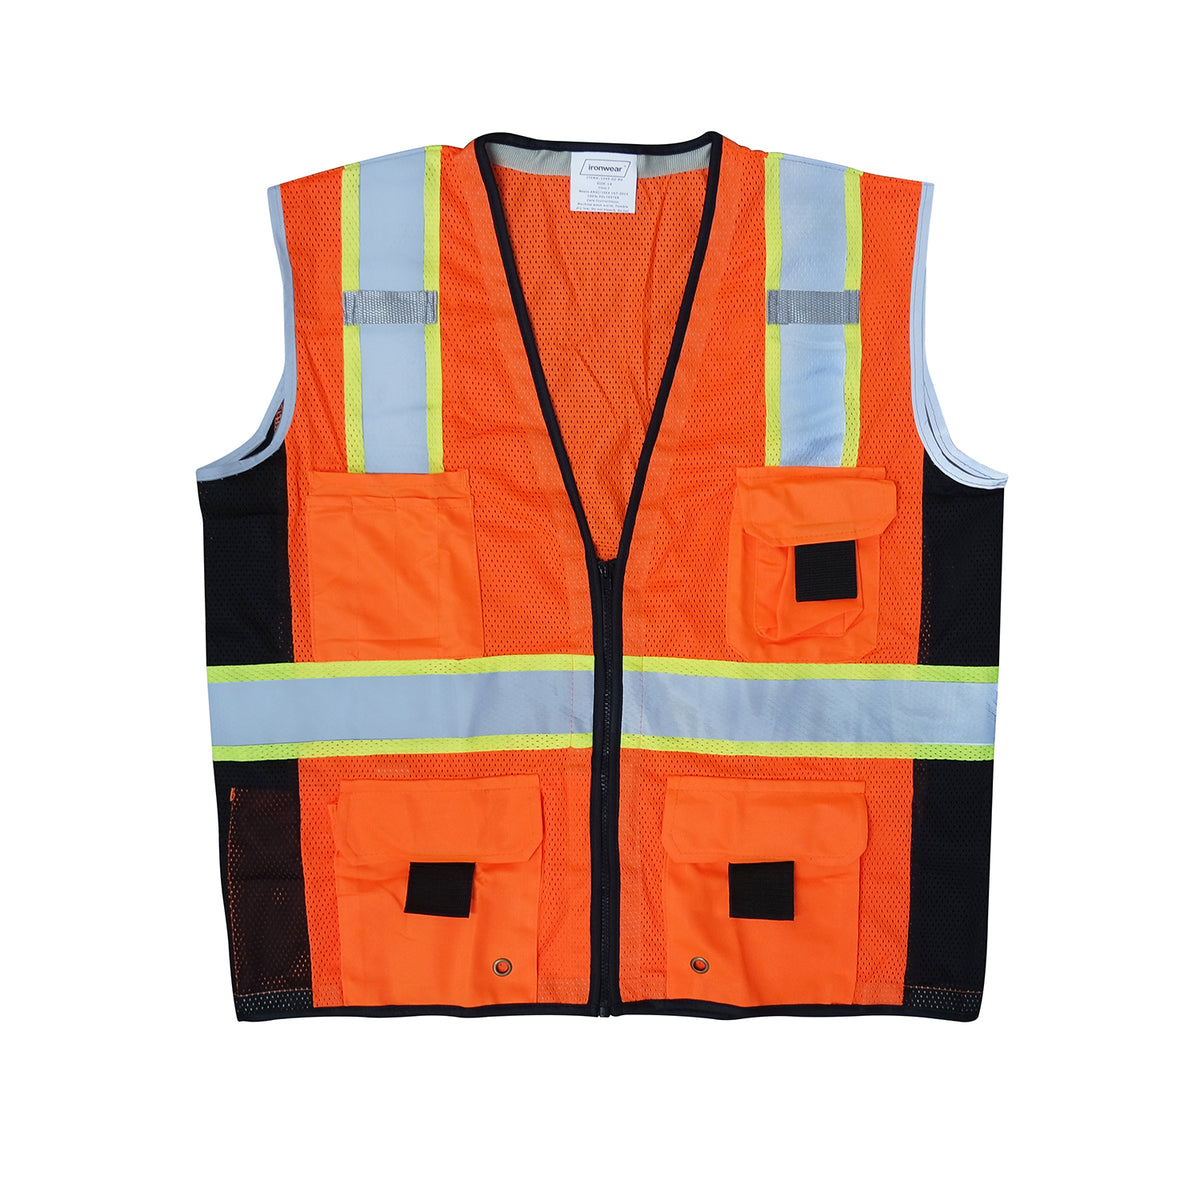 Ironwear Safety Vest, ANSI Class 2 - Orange Mesh, Silver/Lime Stripe -Safety- eGPS Solutions Inc.